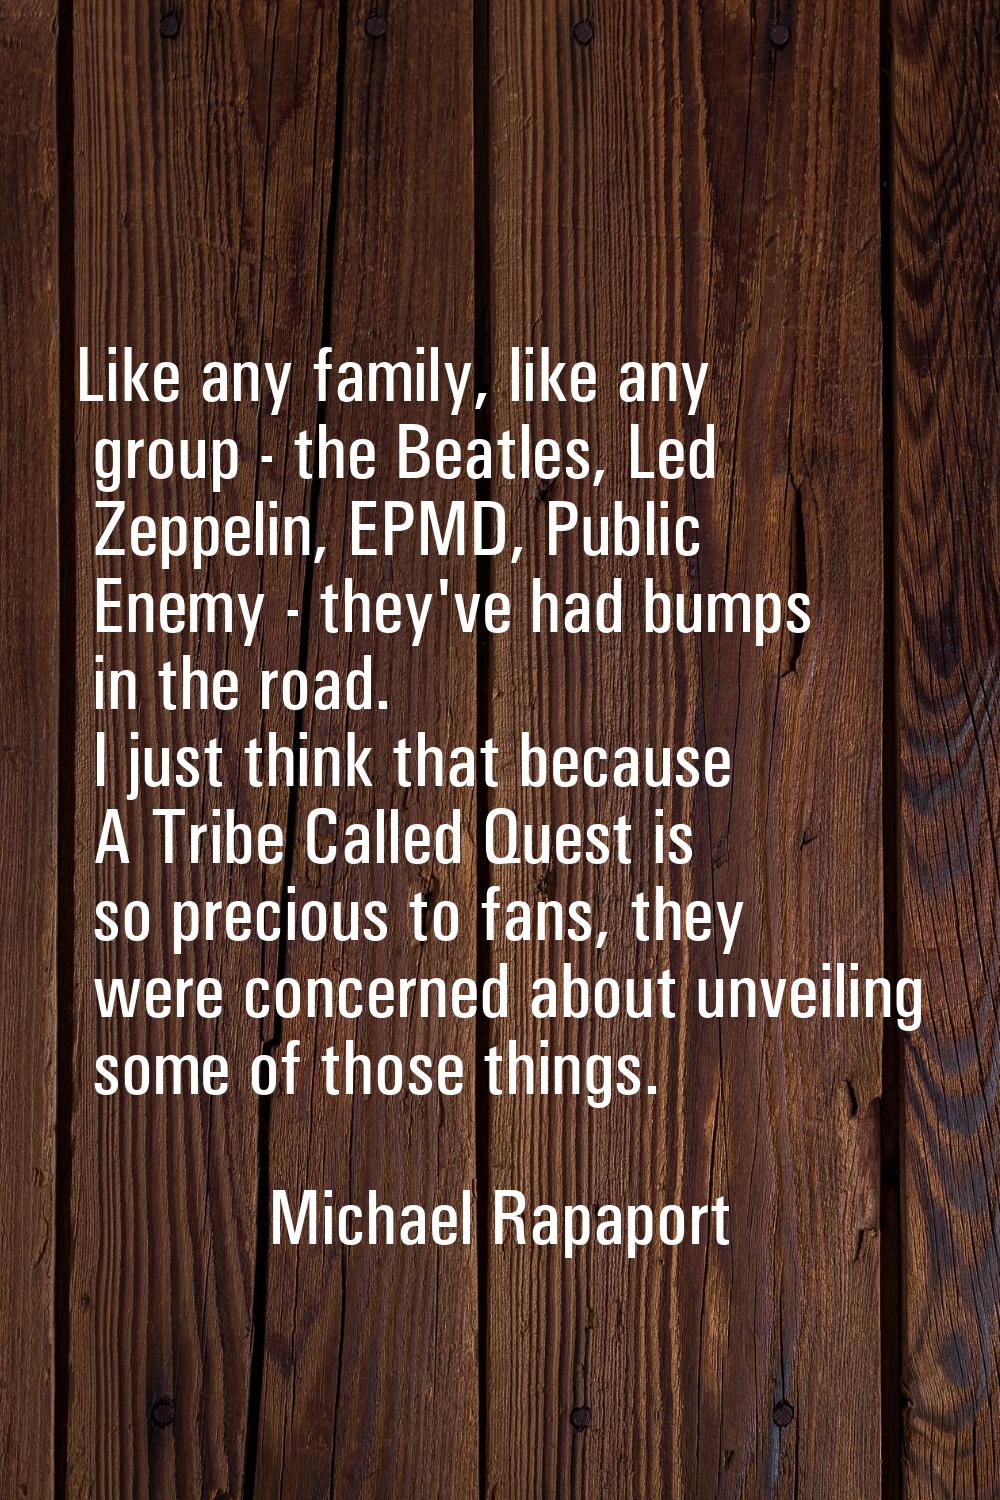 Like any family, like any group - the Beatles, Led Zeppelin, EPMD, Public Enemy - they've had bumps